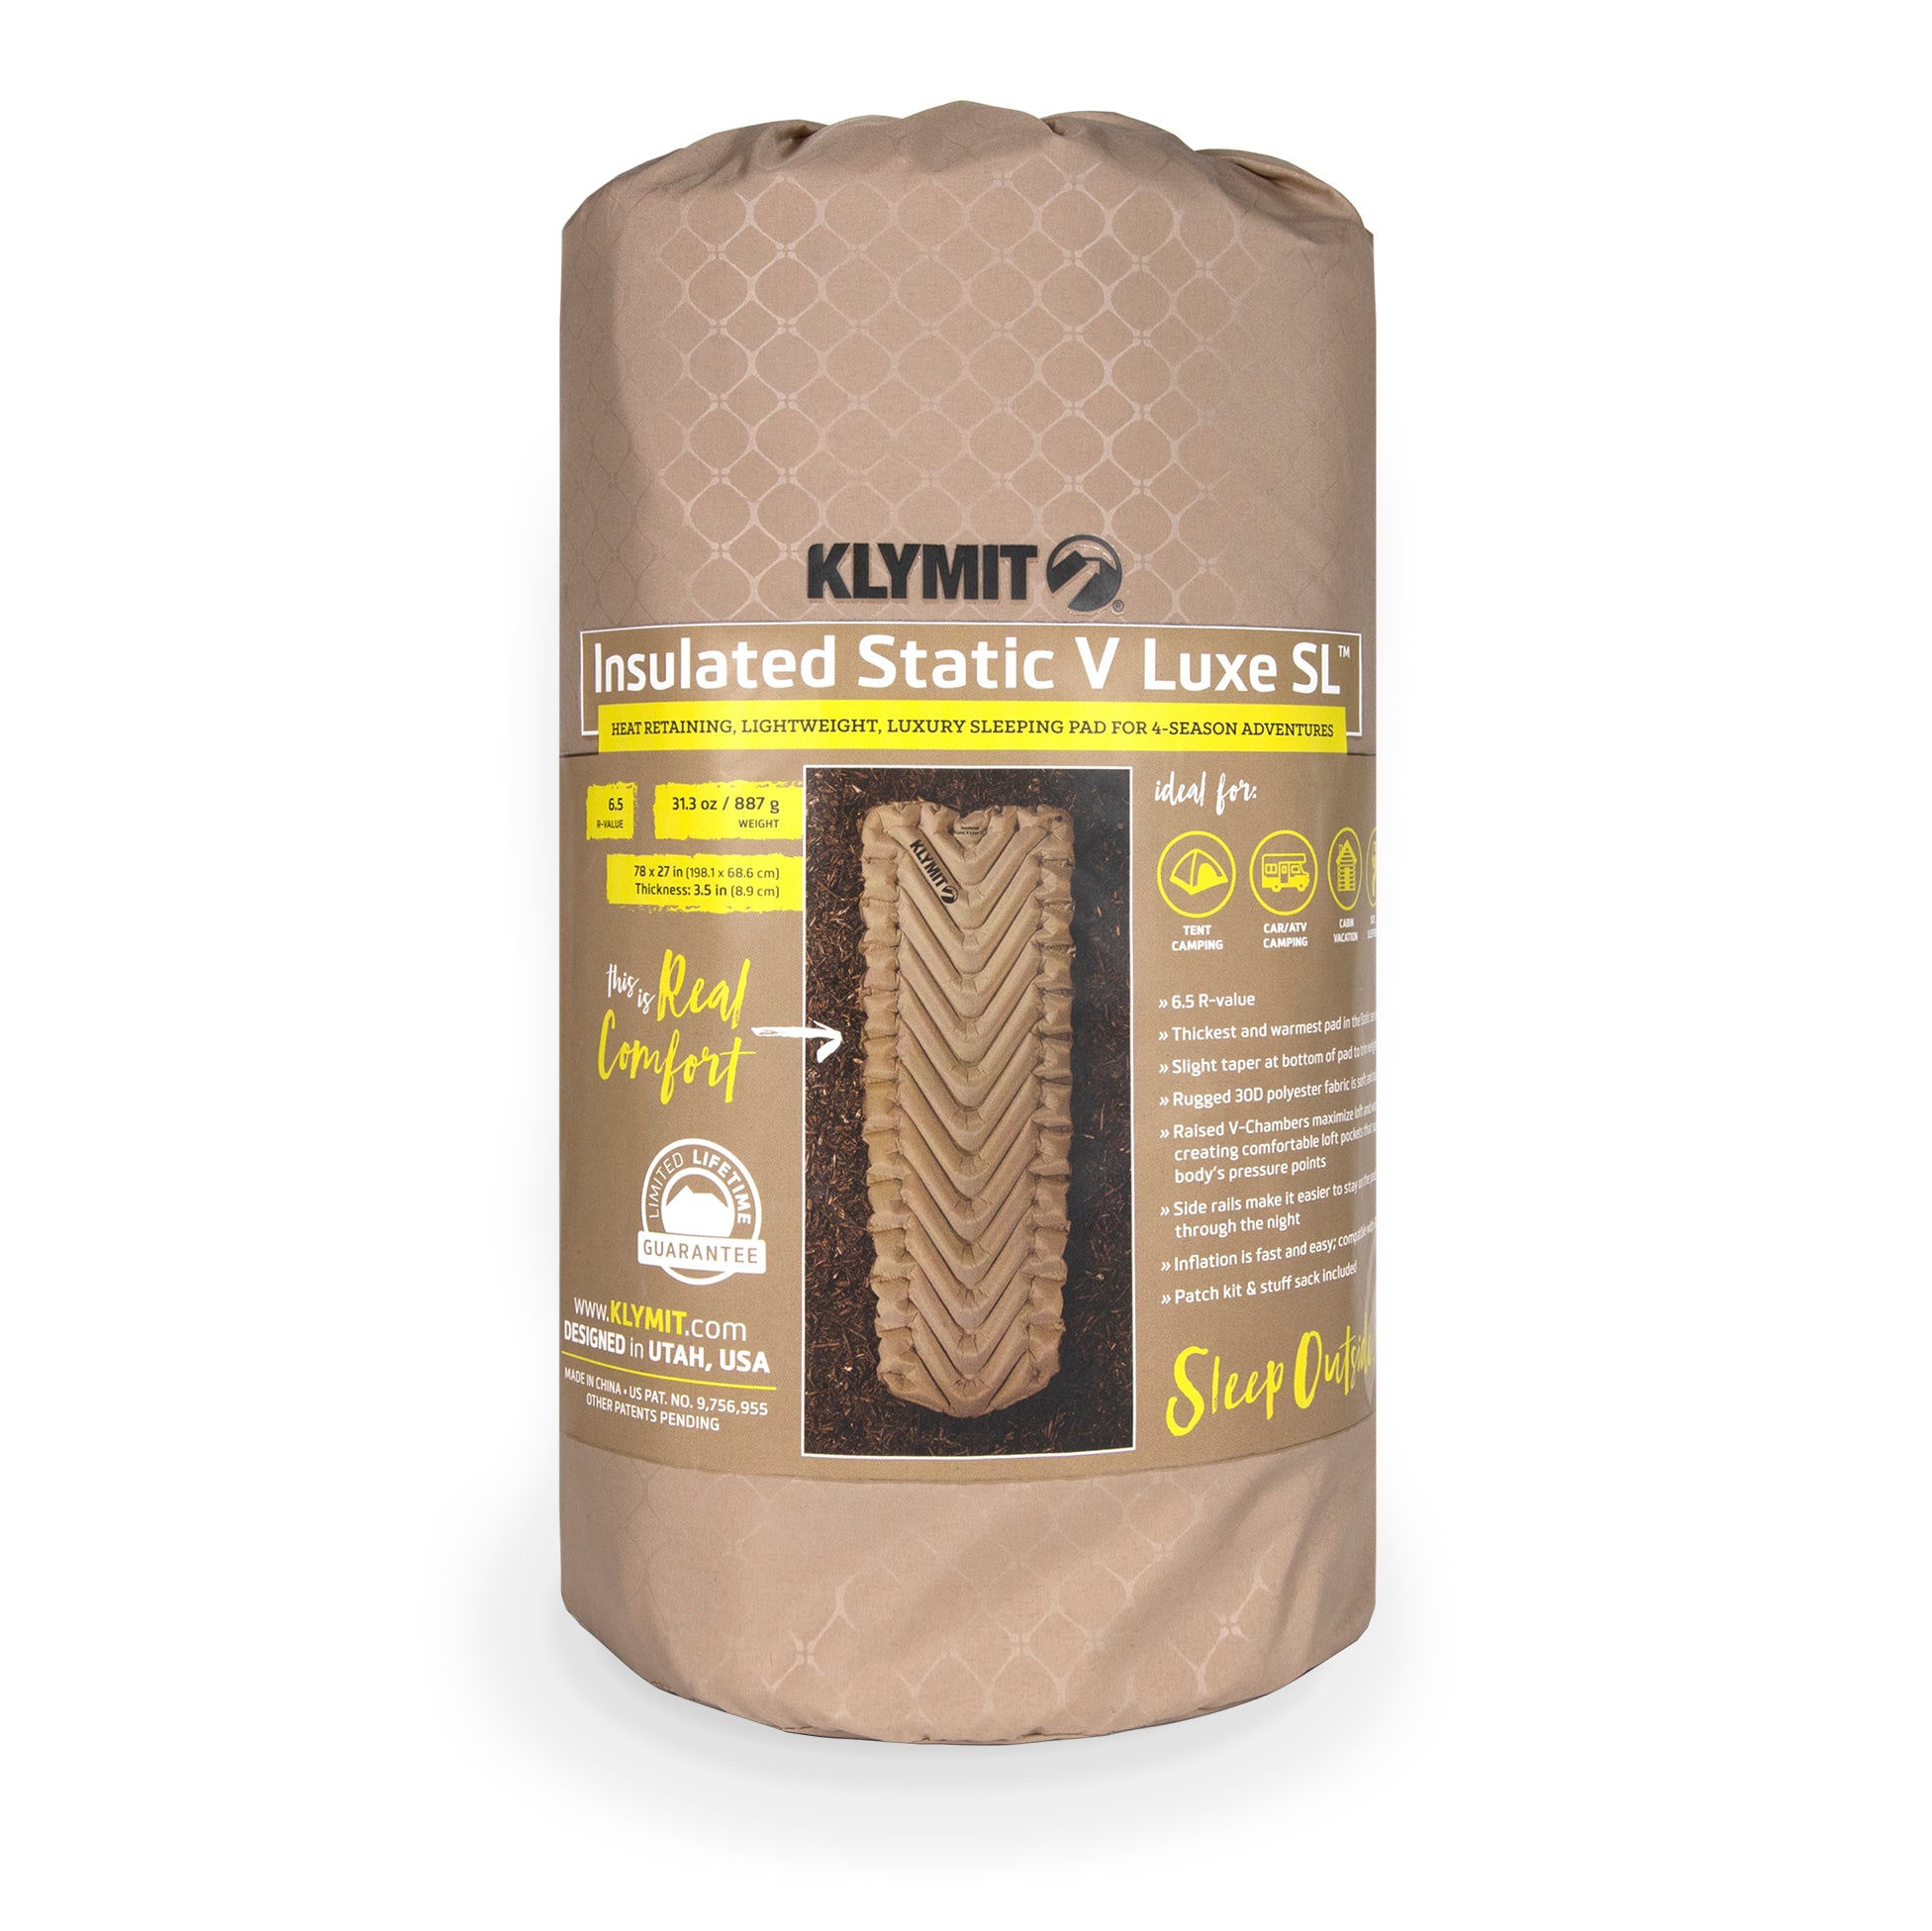 Insulated Static V Luxe SL Sleeping Pads